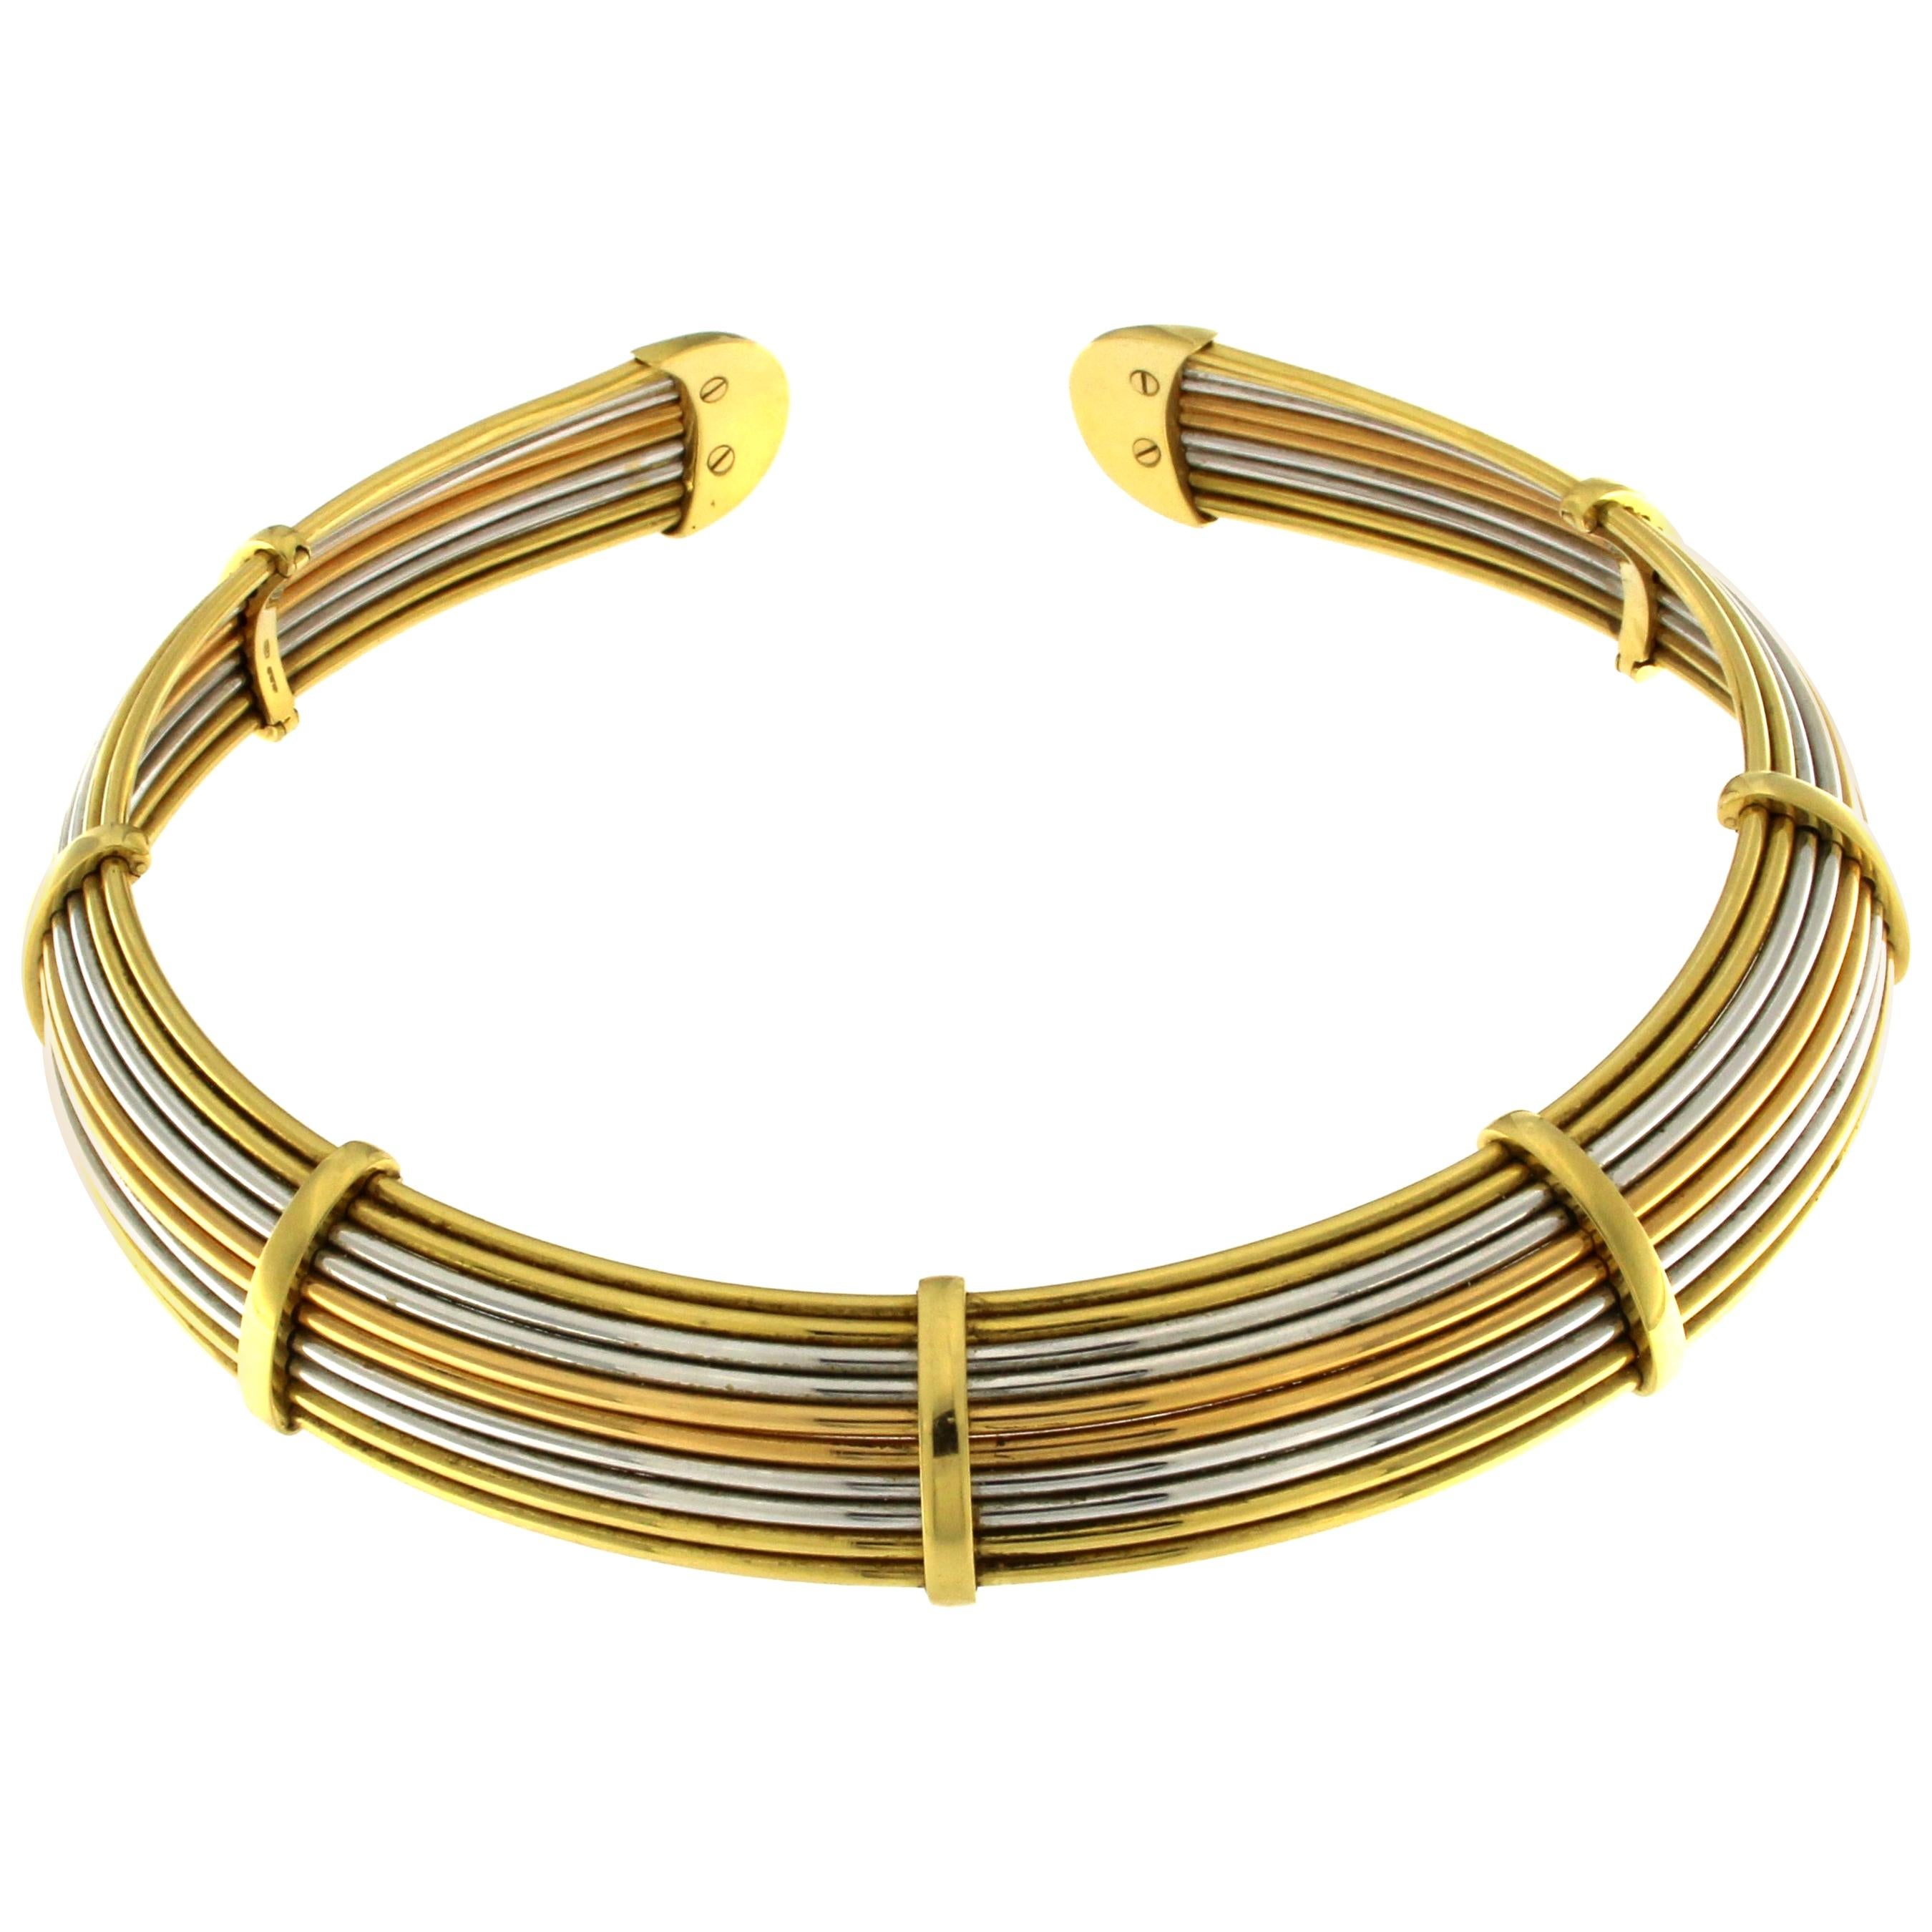 Flexible Chocker in Three-Color Gold